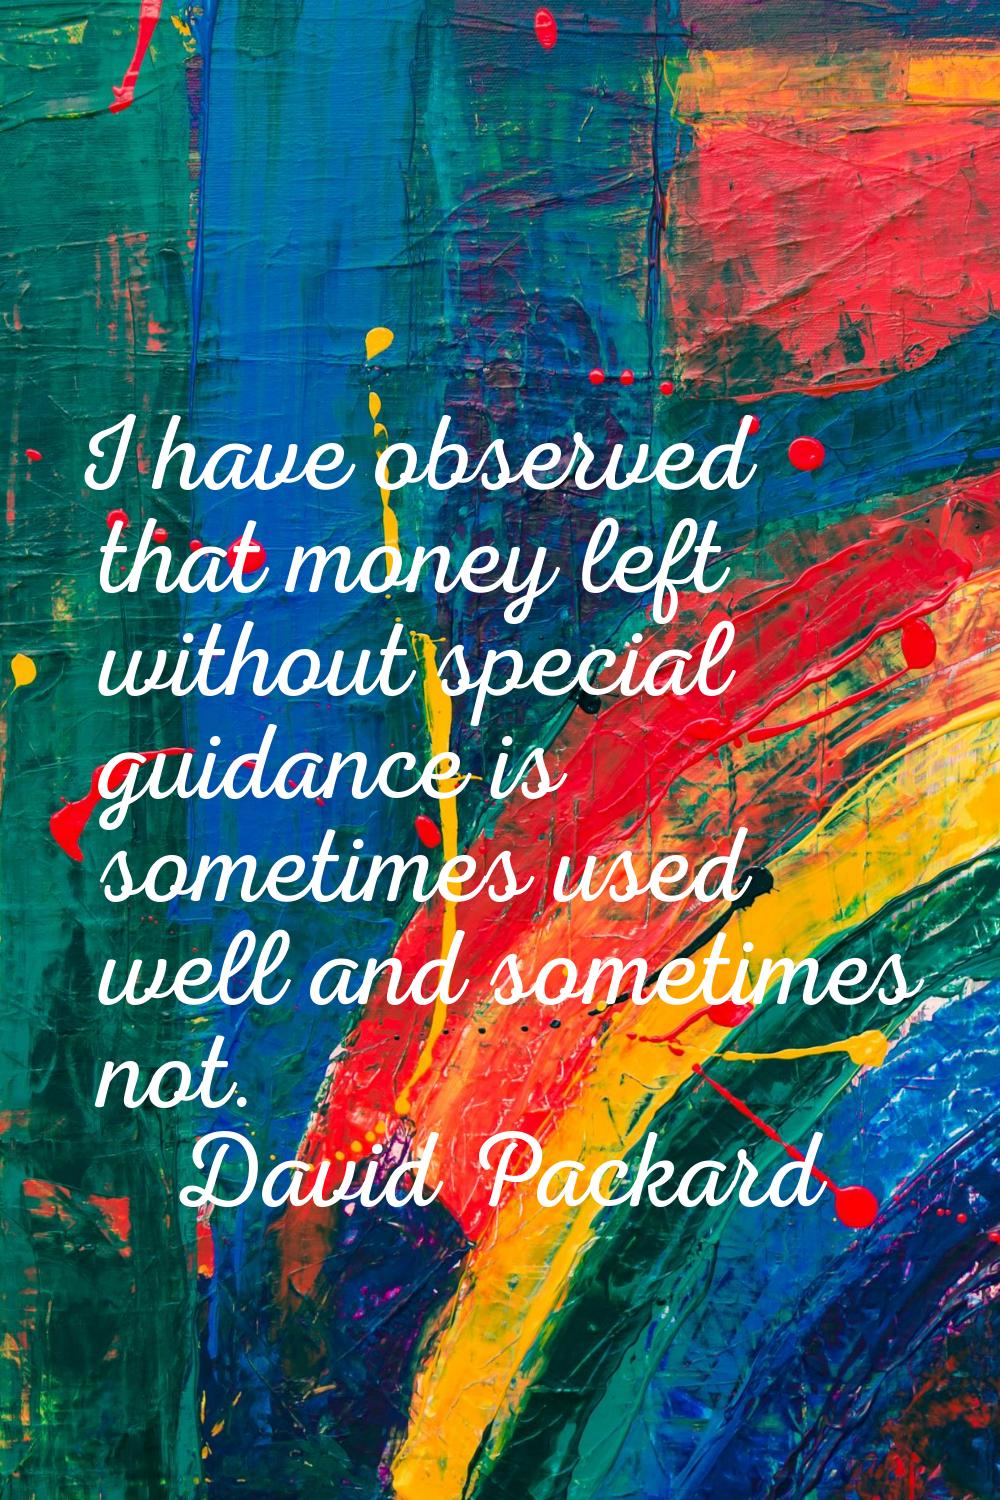 I have observed that money left without special guidance is sometimes used well and sometimes not.